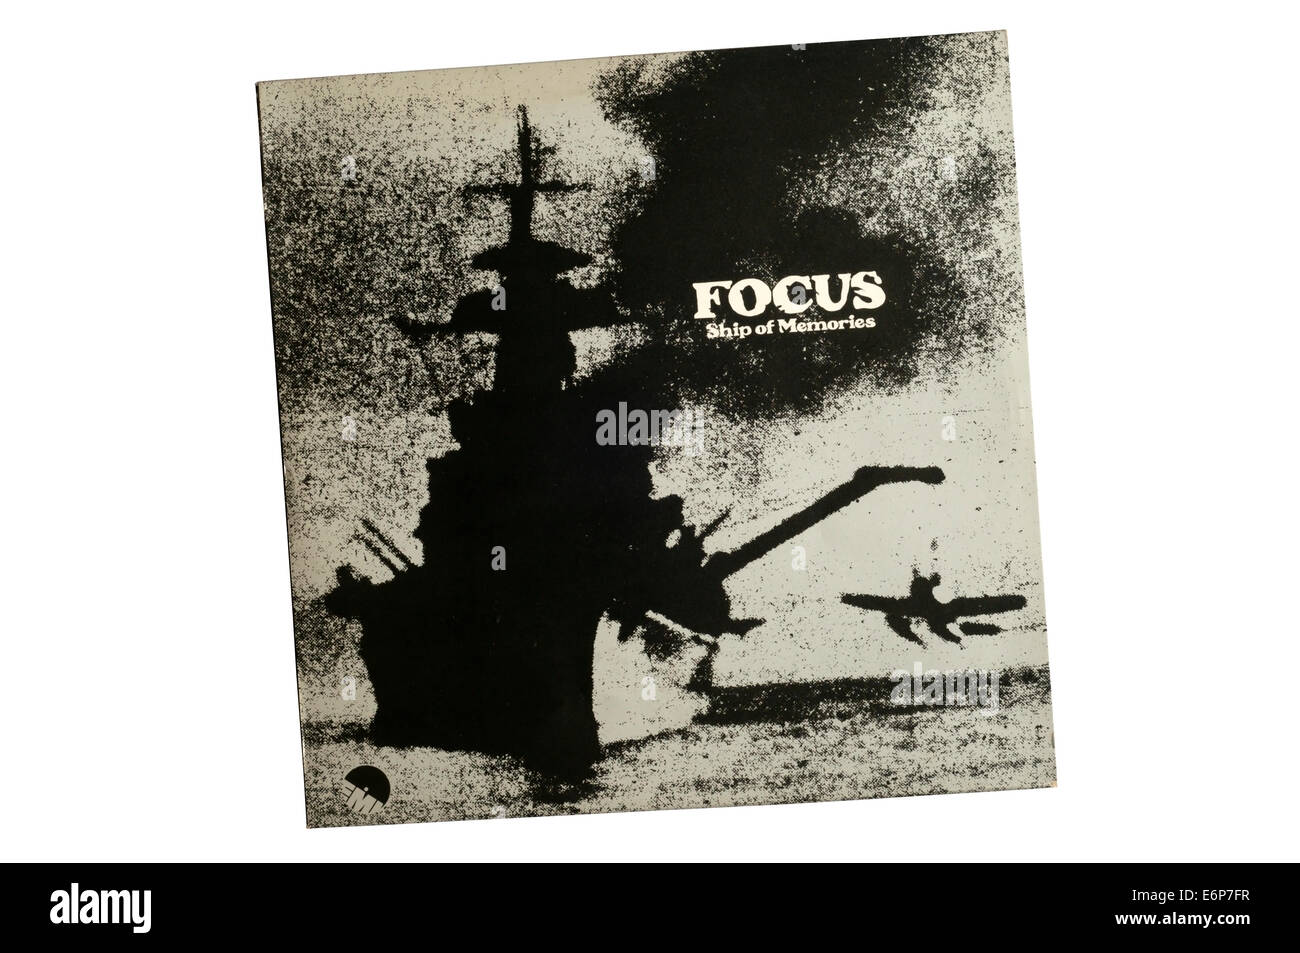 Ship of Memories was the 6th studio album by the Dutch progressive rock band Focus. It was released in 1976. Stock Photo